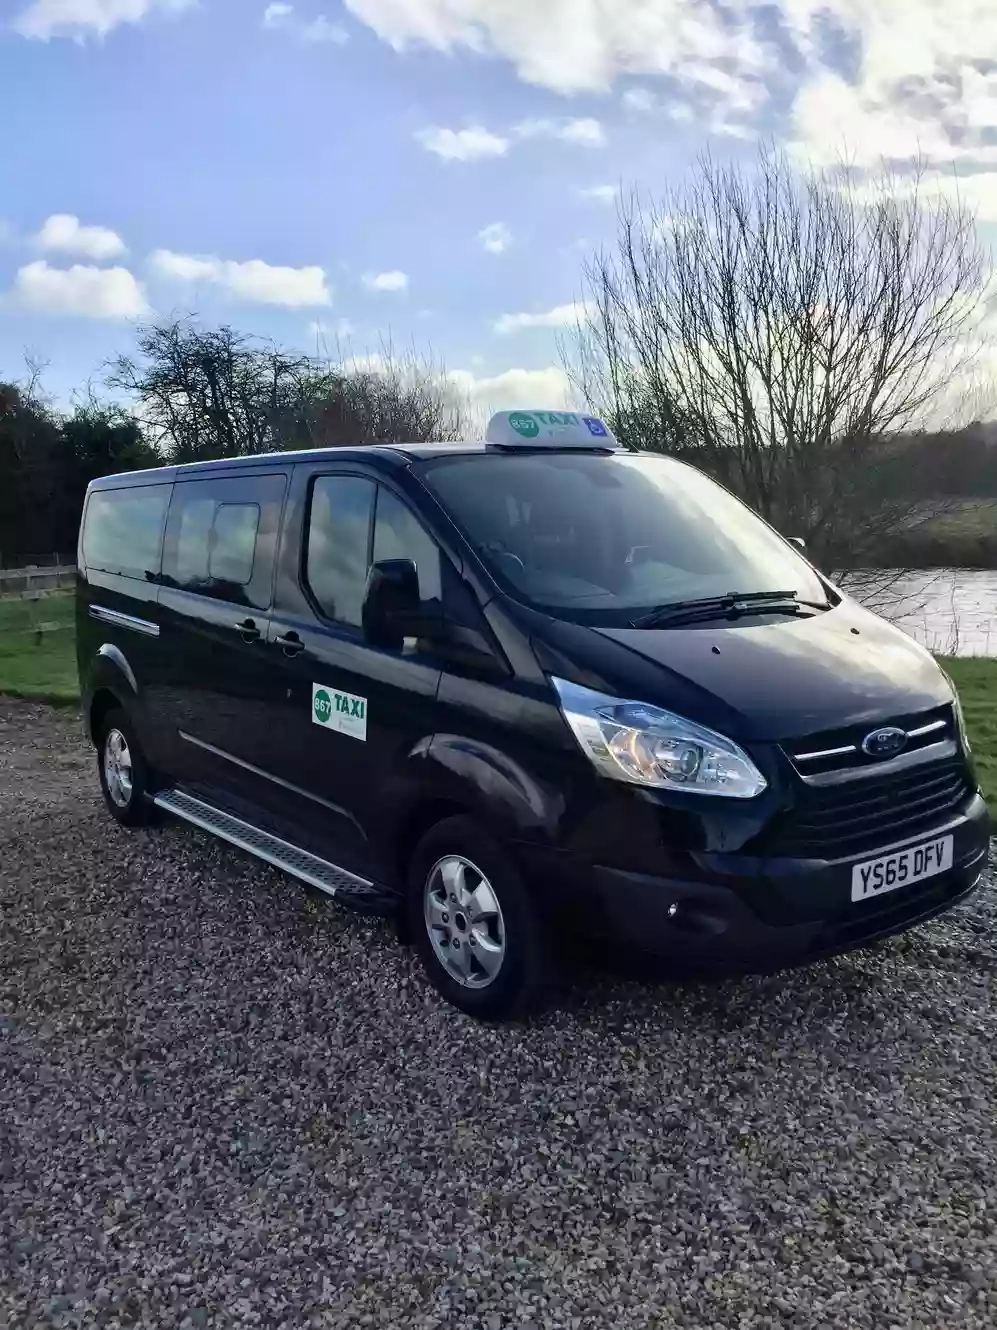 Phil's Taxi and 8 Seater Minibus service, Newbury and Surrounding Areas